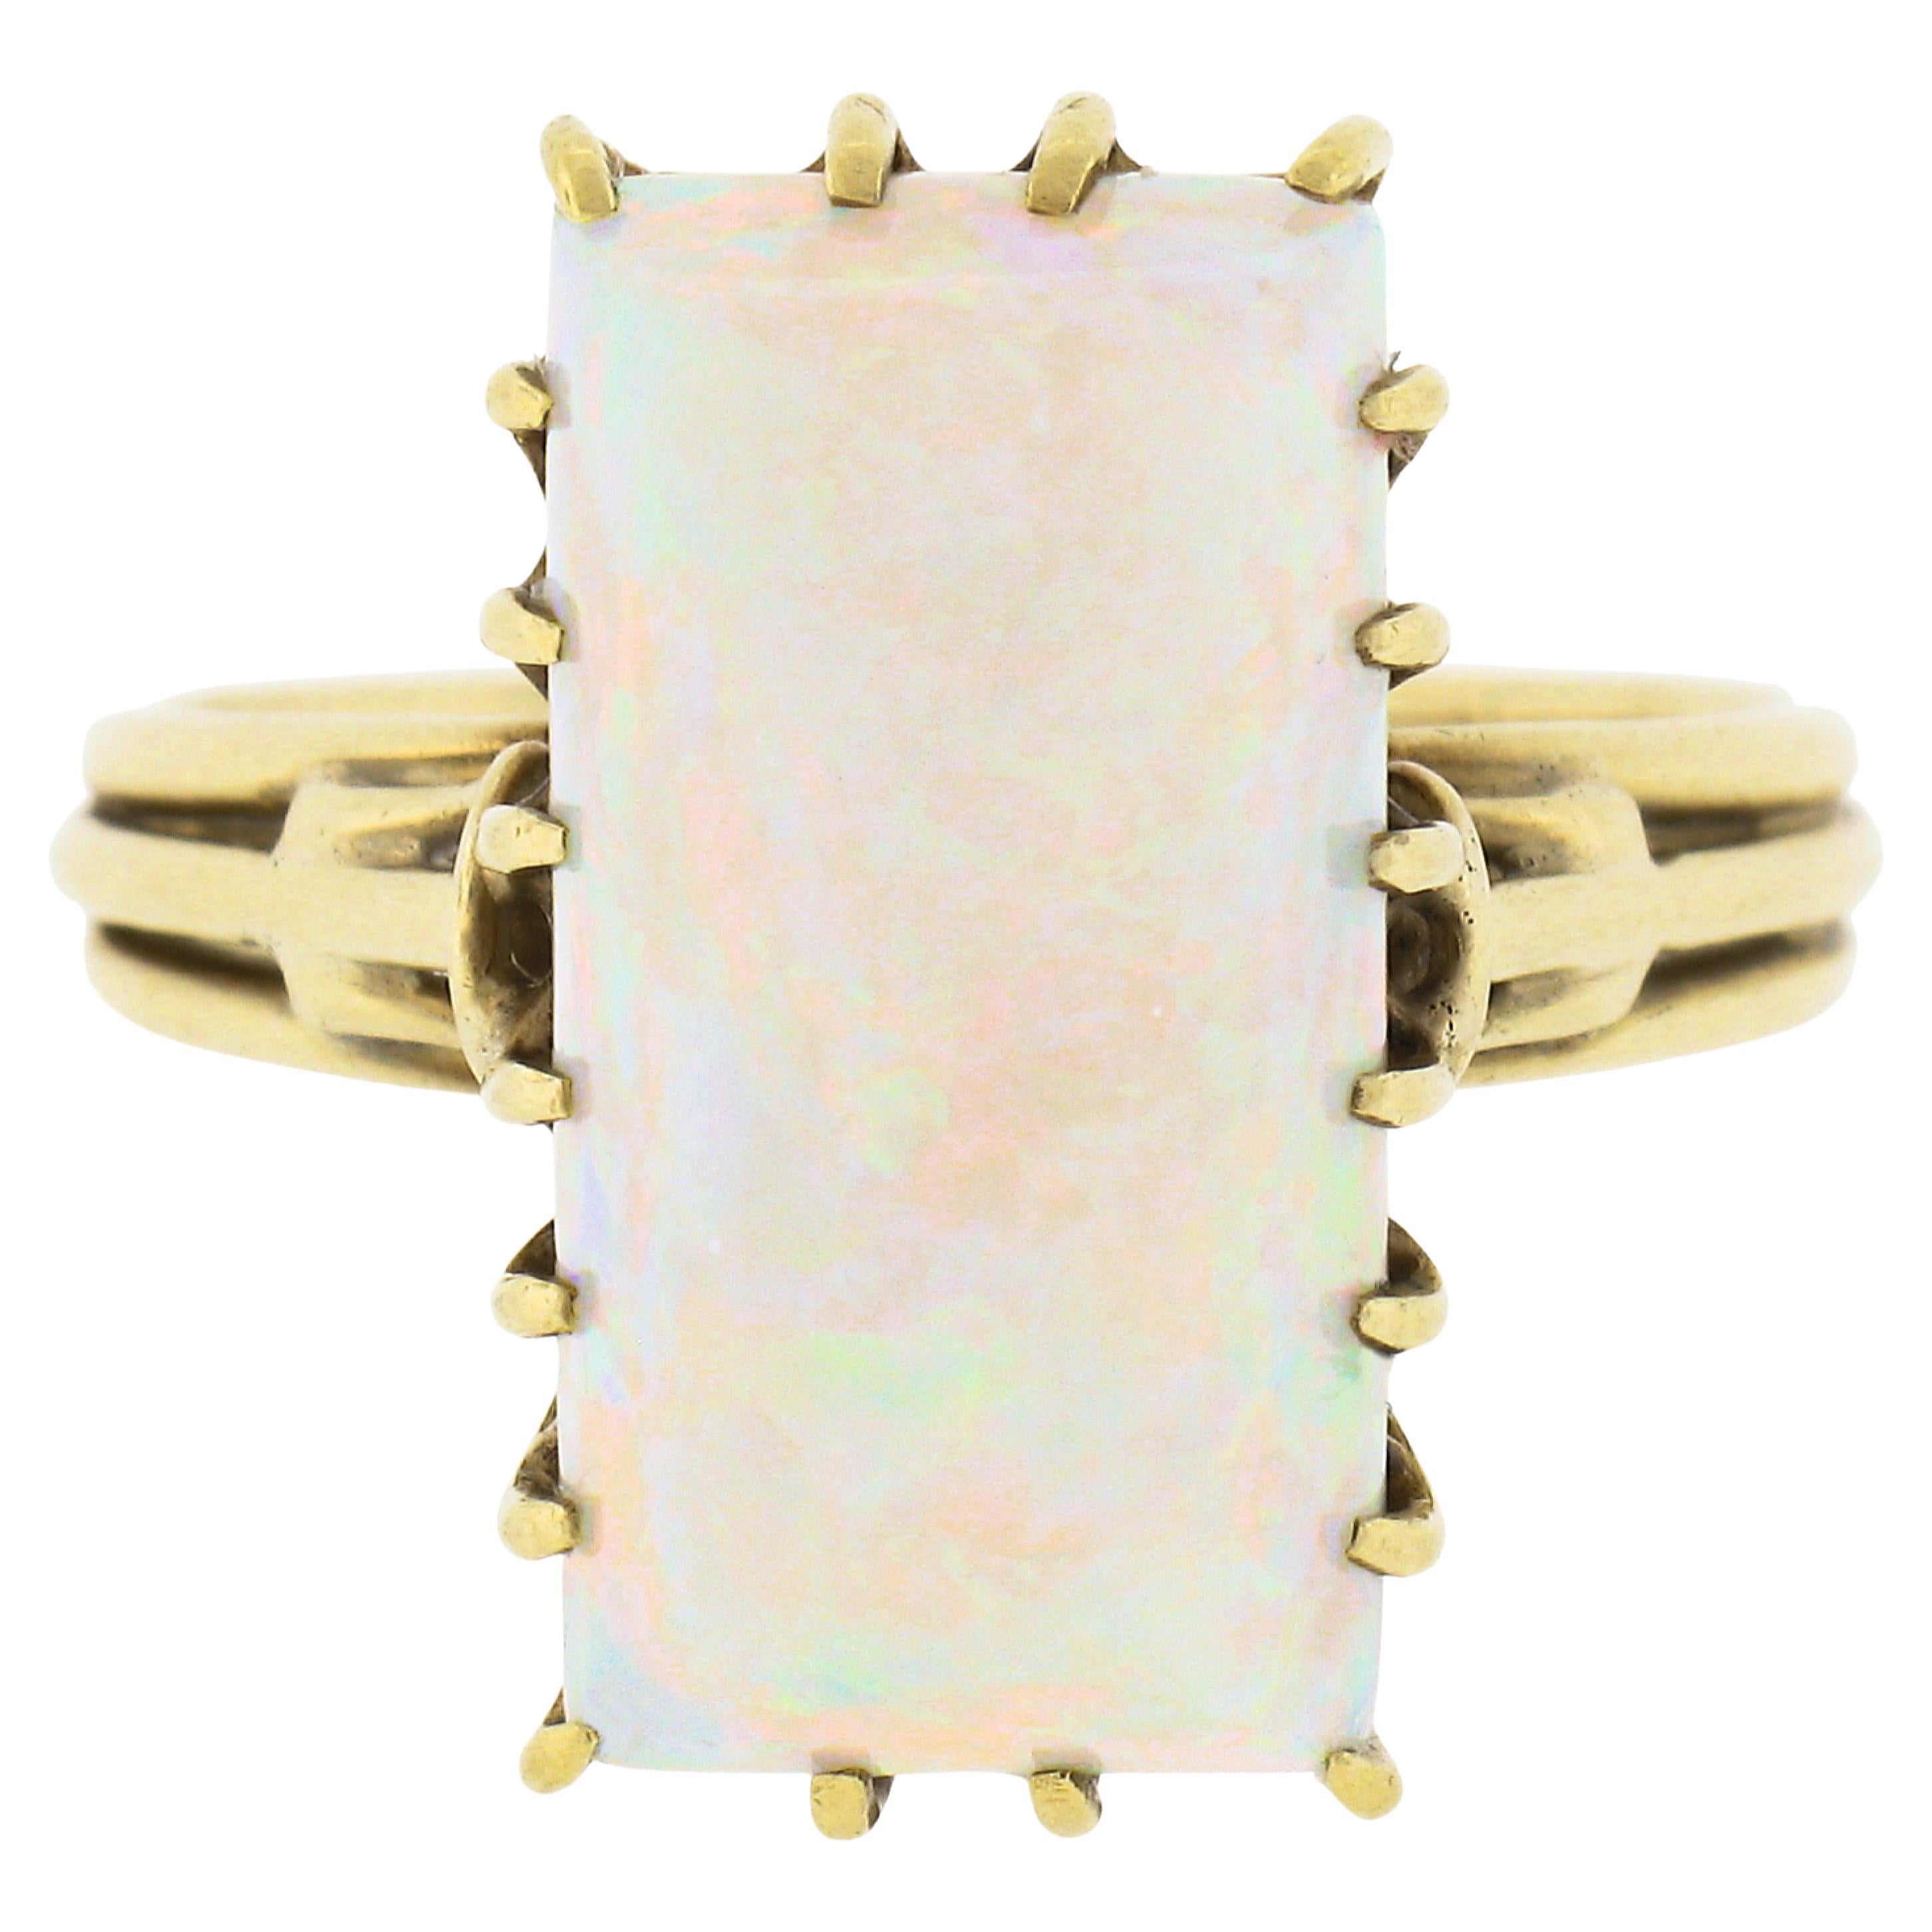 Vintage Handmade 18k Gold Rectangular Cabochon Cut Opal Solitaire Cocktail Ring For Sale